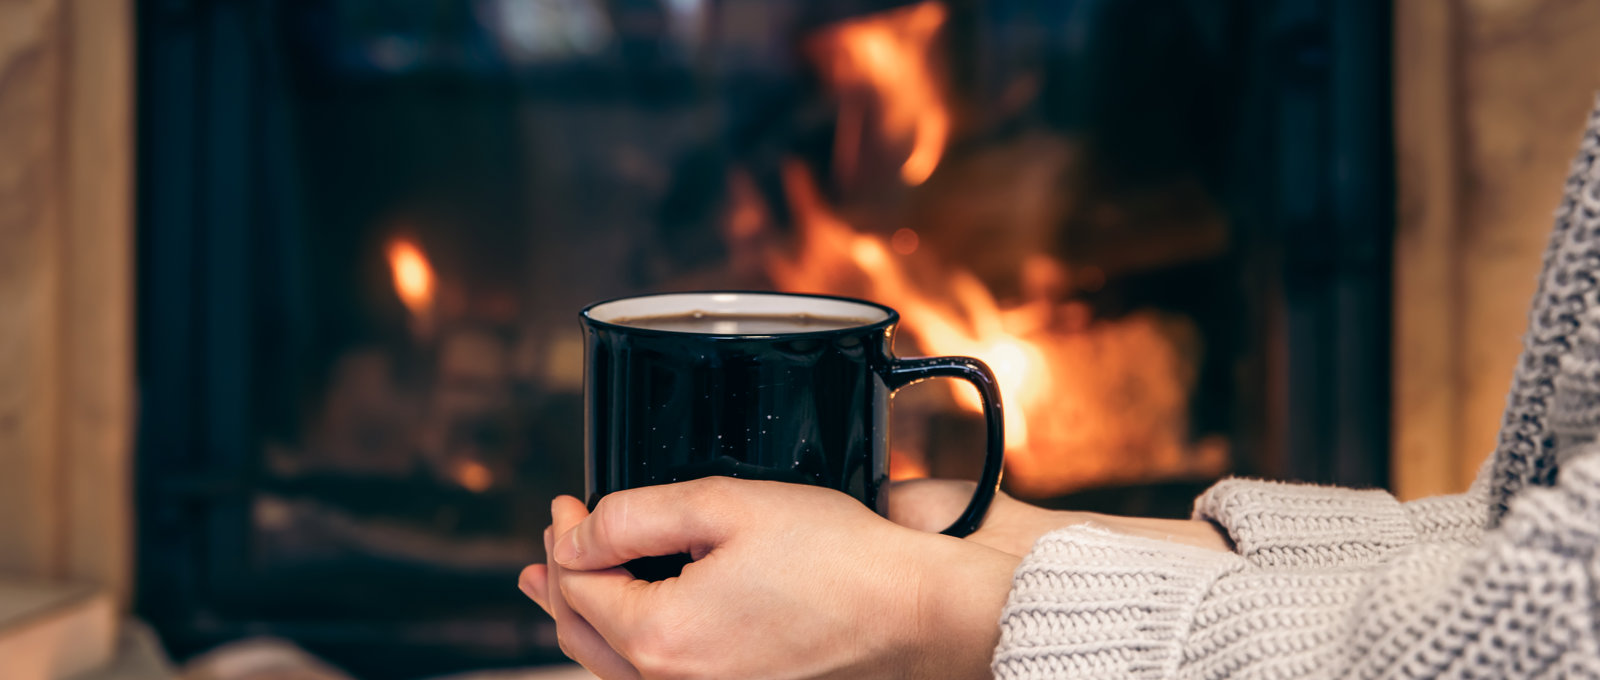 Cup With Hot Drink Female Hands Blurred Fireplace Background